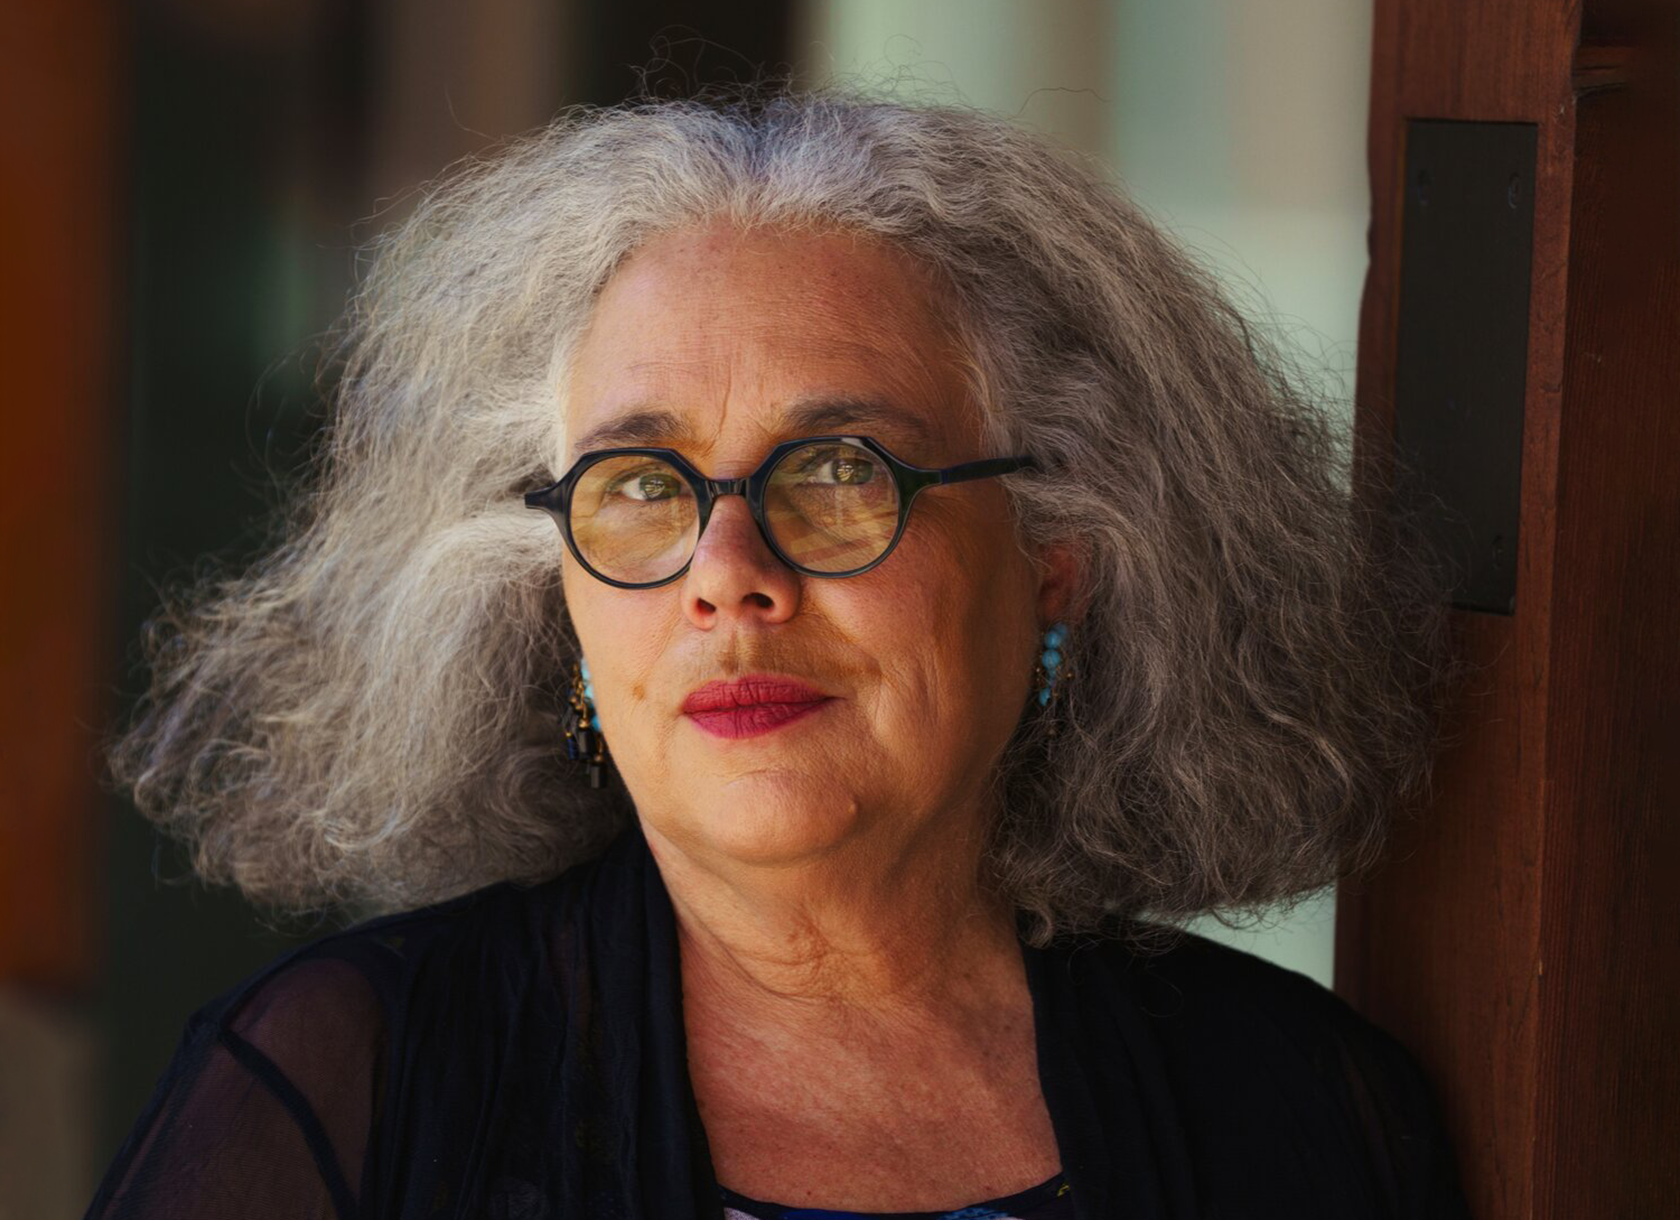 Portrait of Alison Saar '78, renowned artist and alumna of Scripps College in Southern California